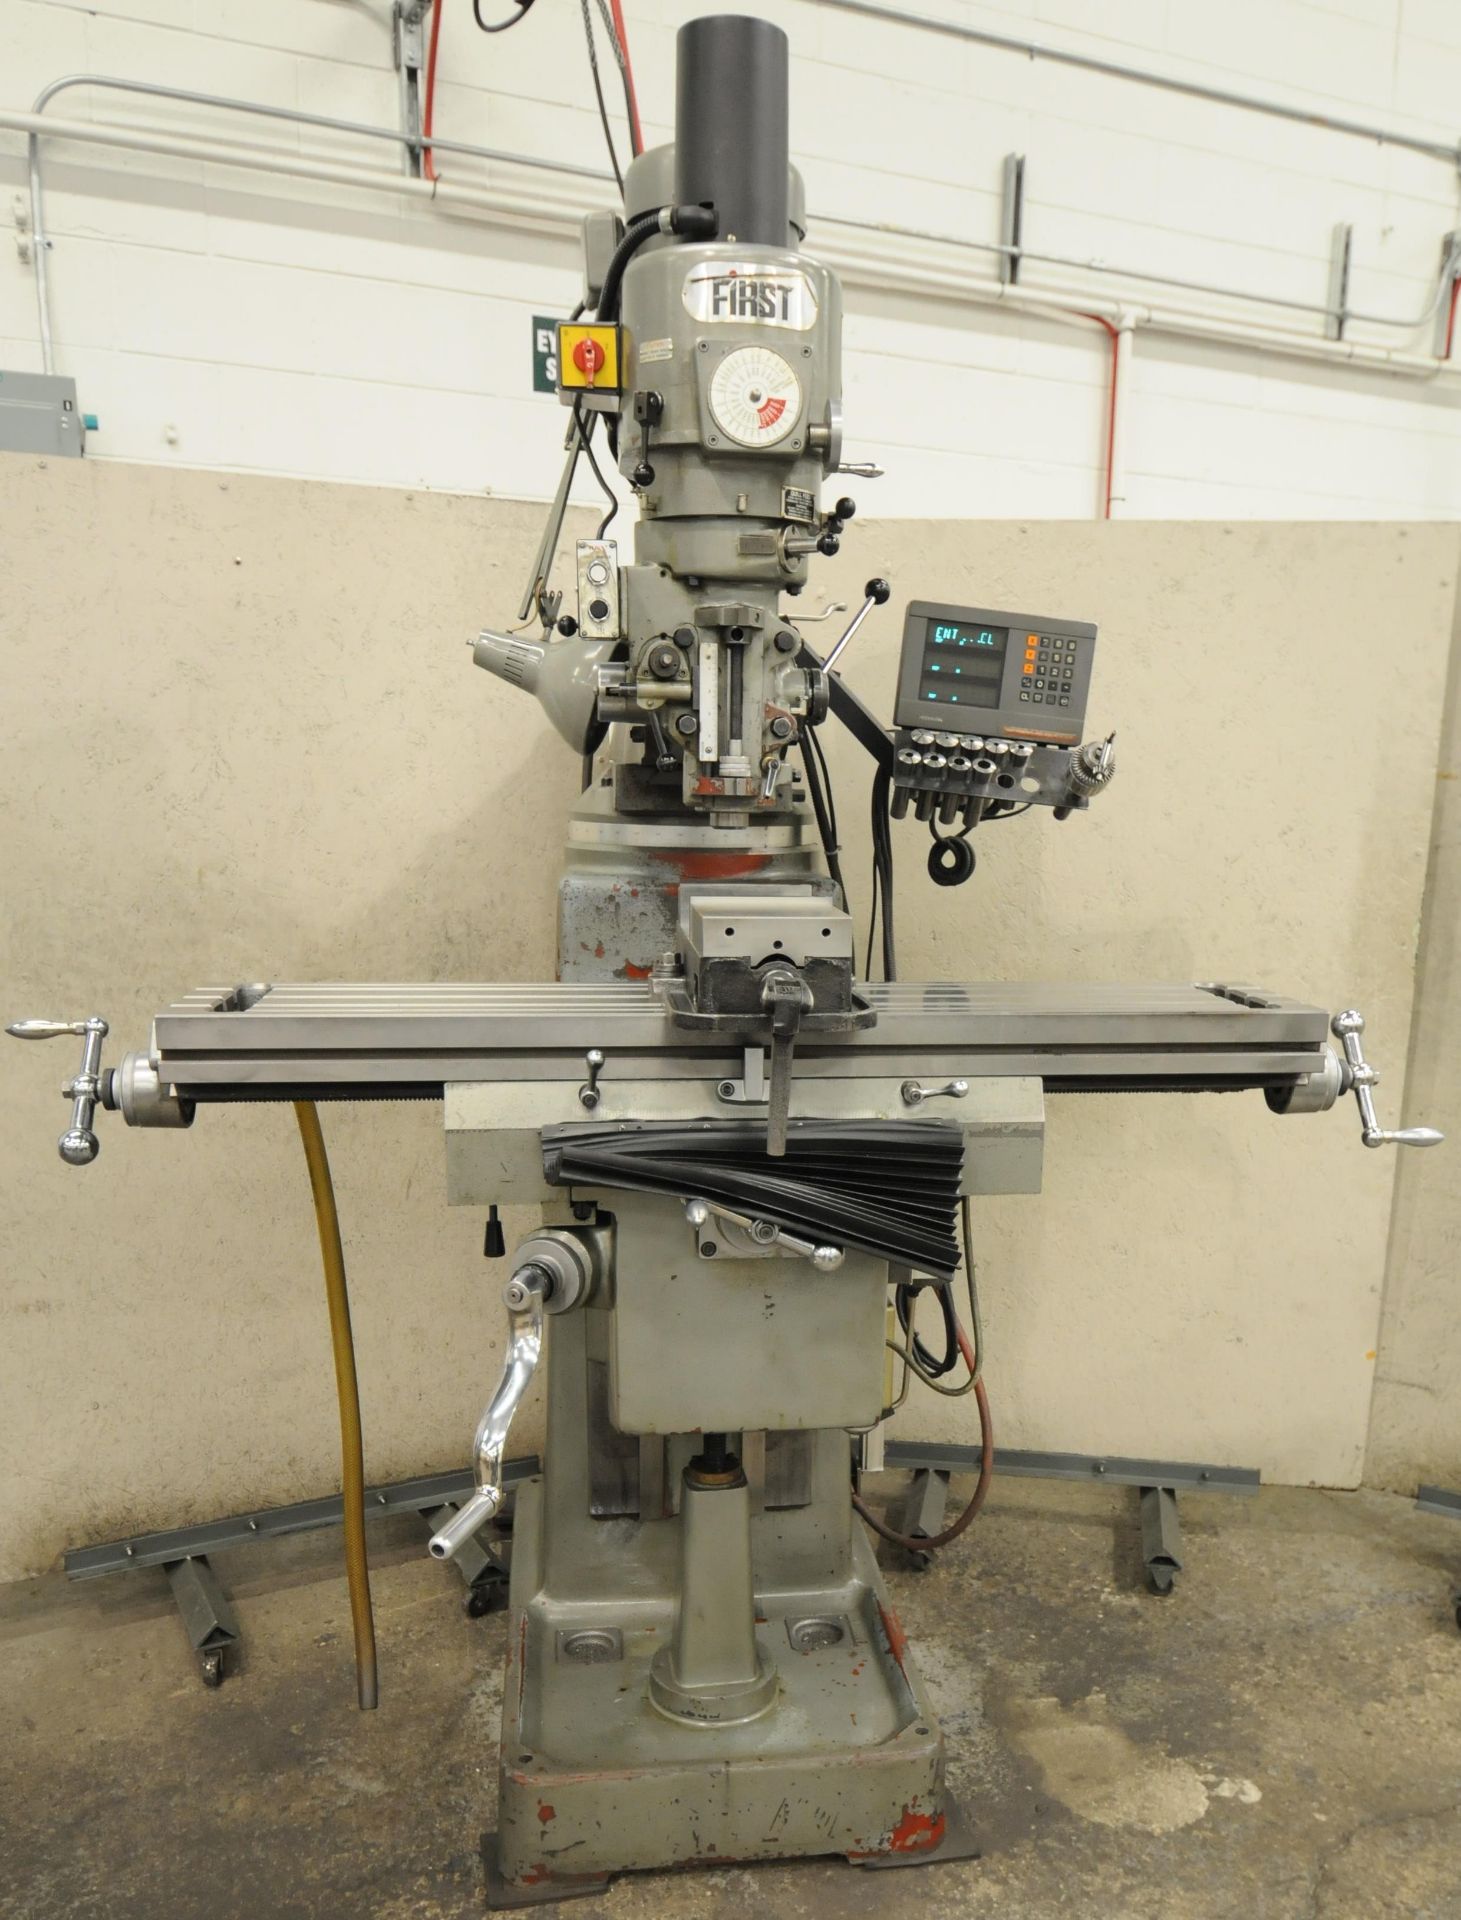 FIRST TURRET MILLING MACHINE WITH SPEEDS TO 4500 RPM, 43.5" X 10" T-SLOT TABLE WITH HEIDENHAIN 2